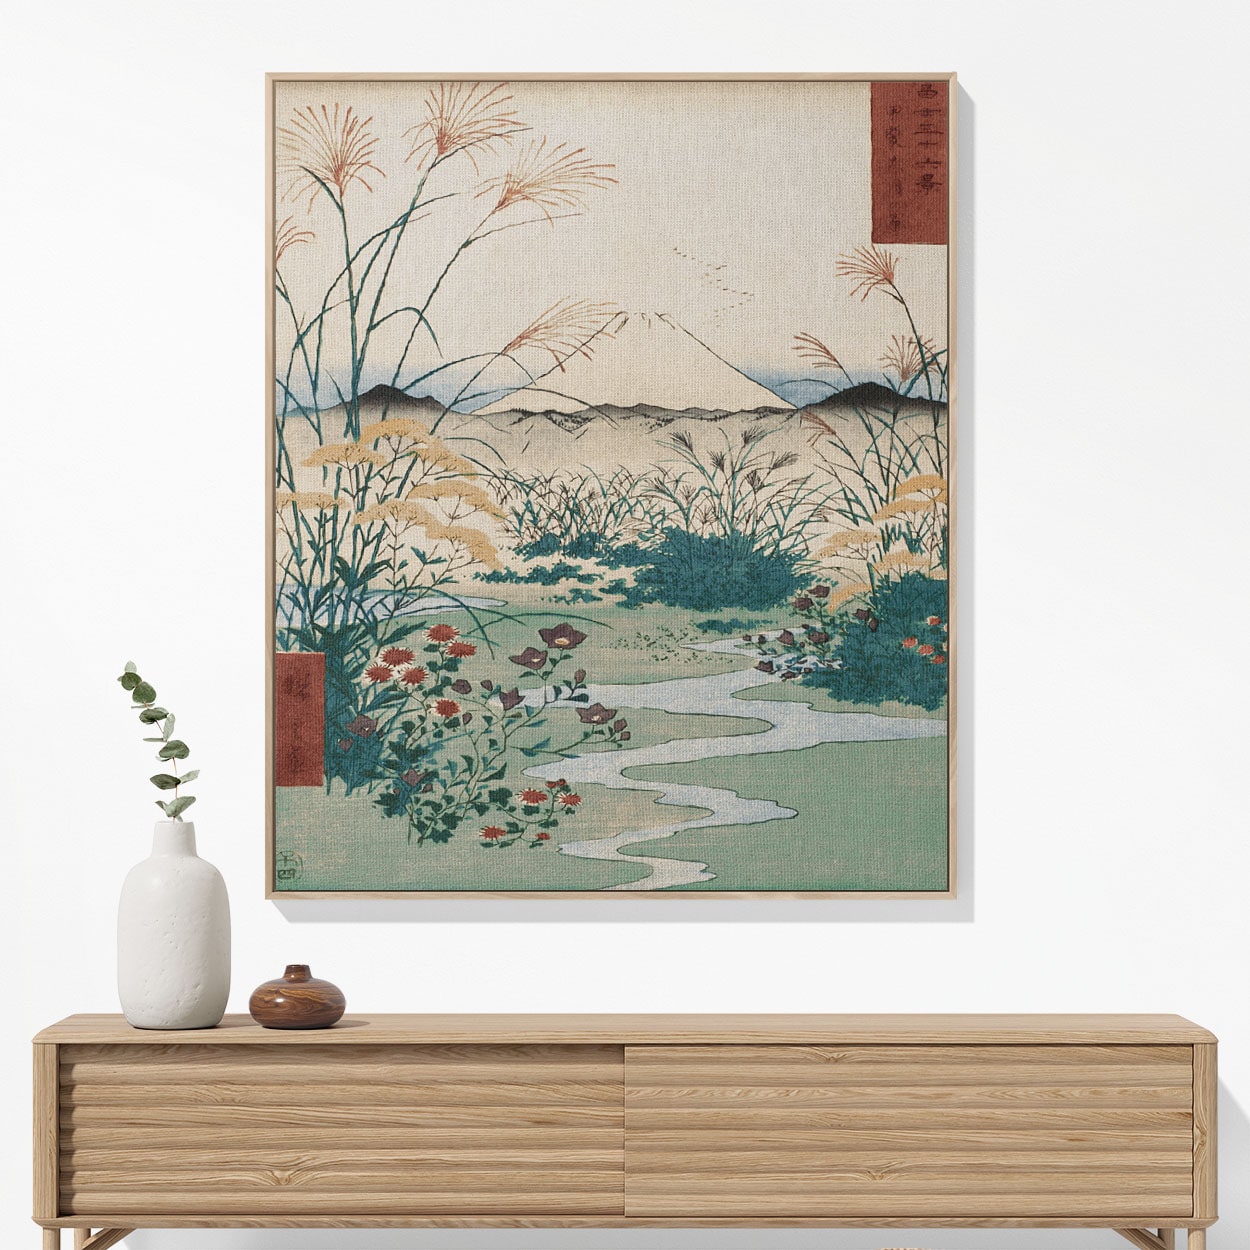 Japanese Spring Landscape Woven Blanket Woven Blanket Hanging on a Wall as Framed Wall Art